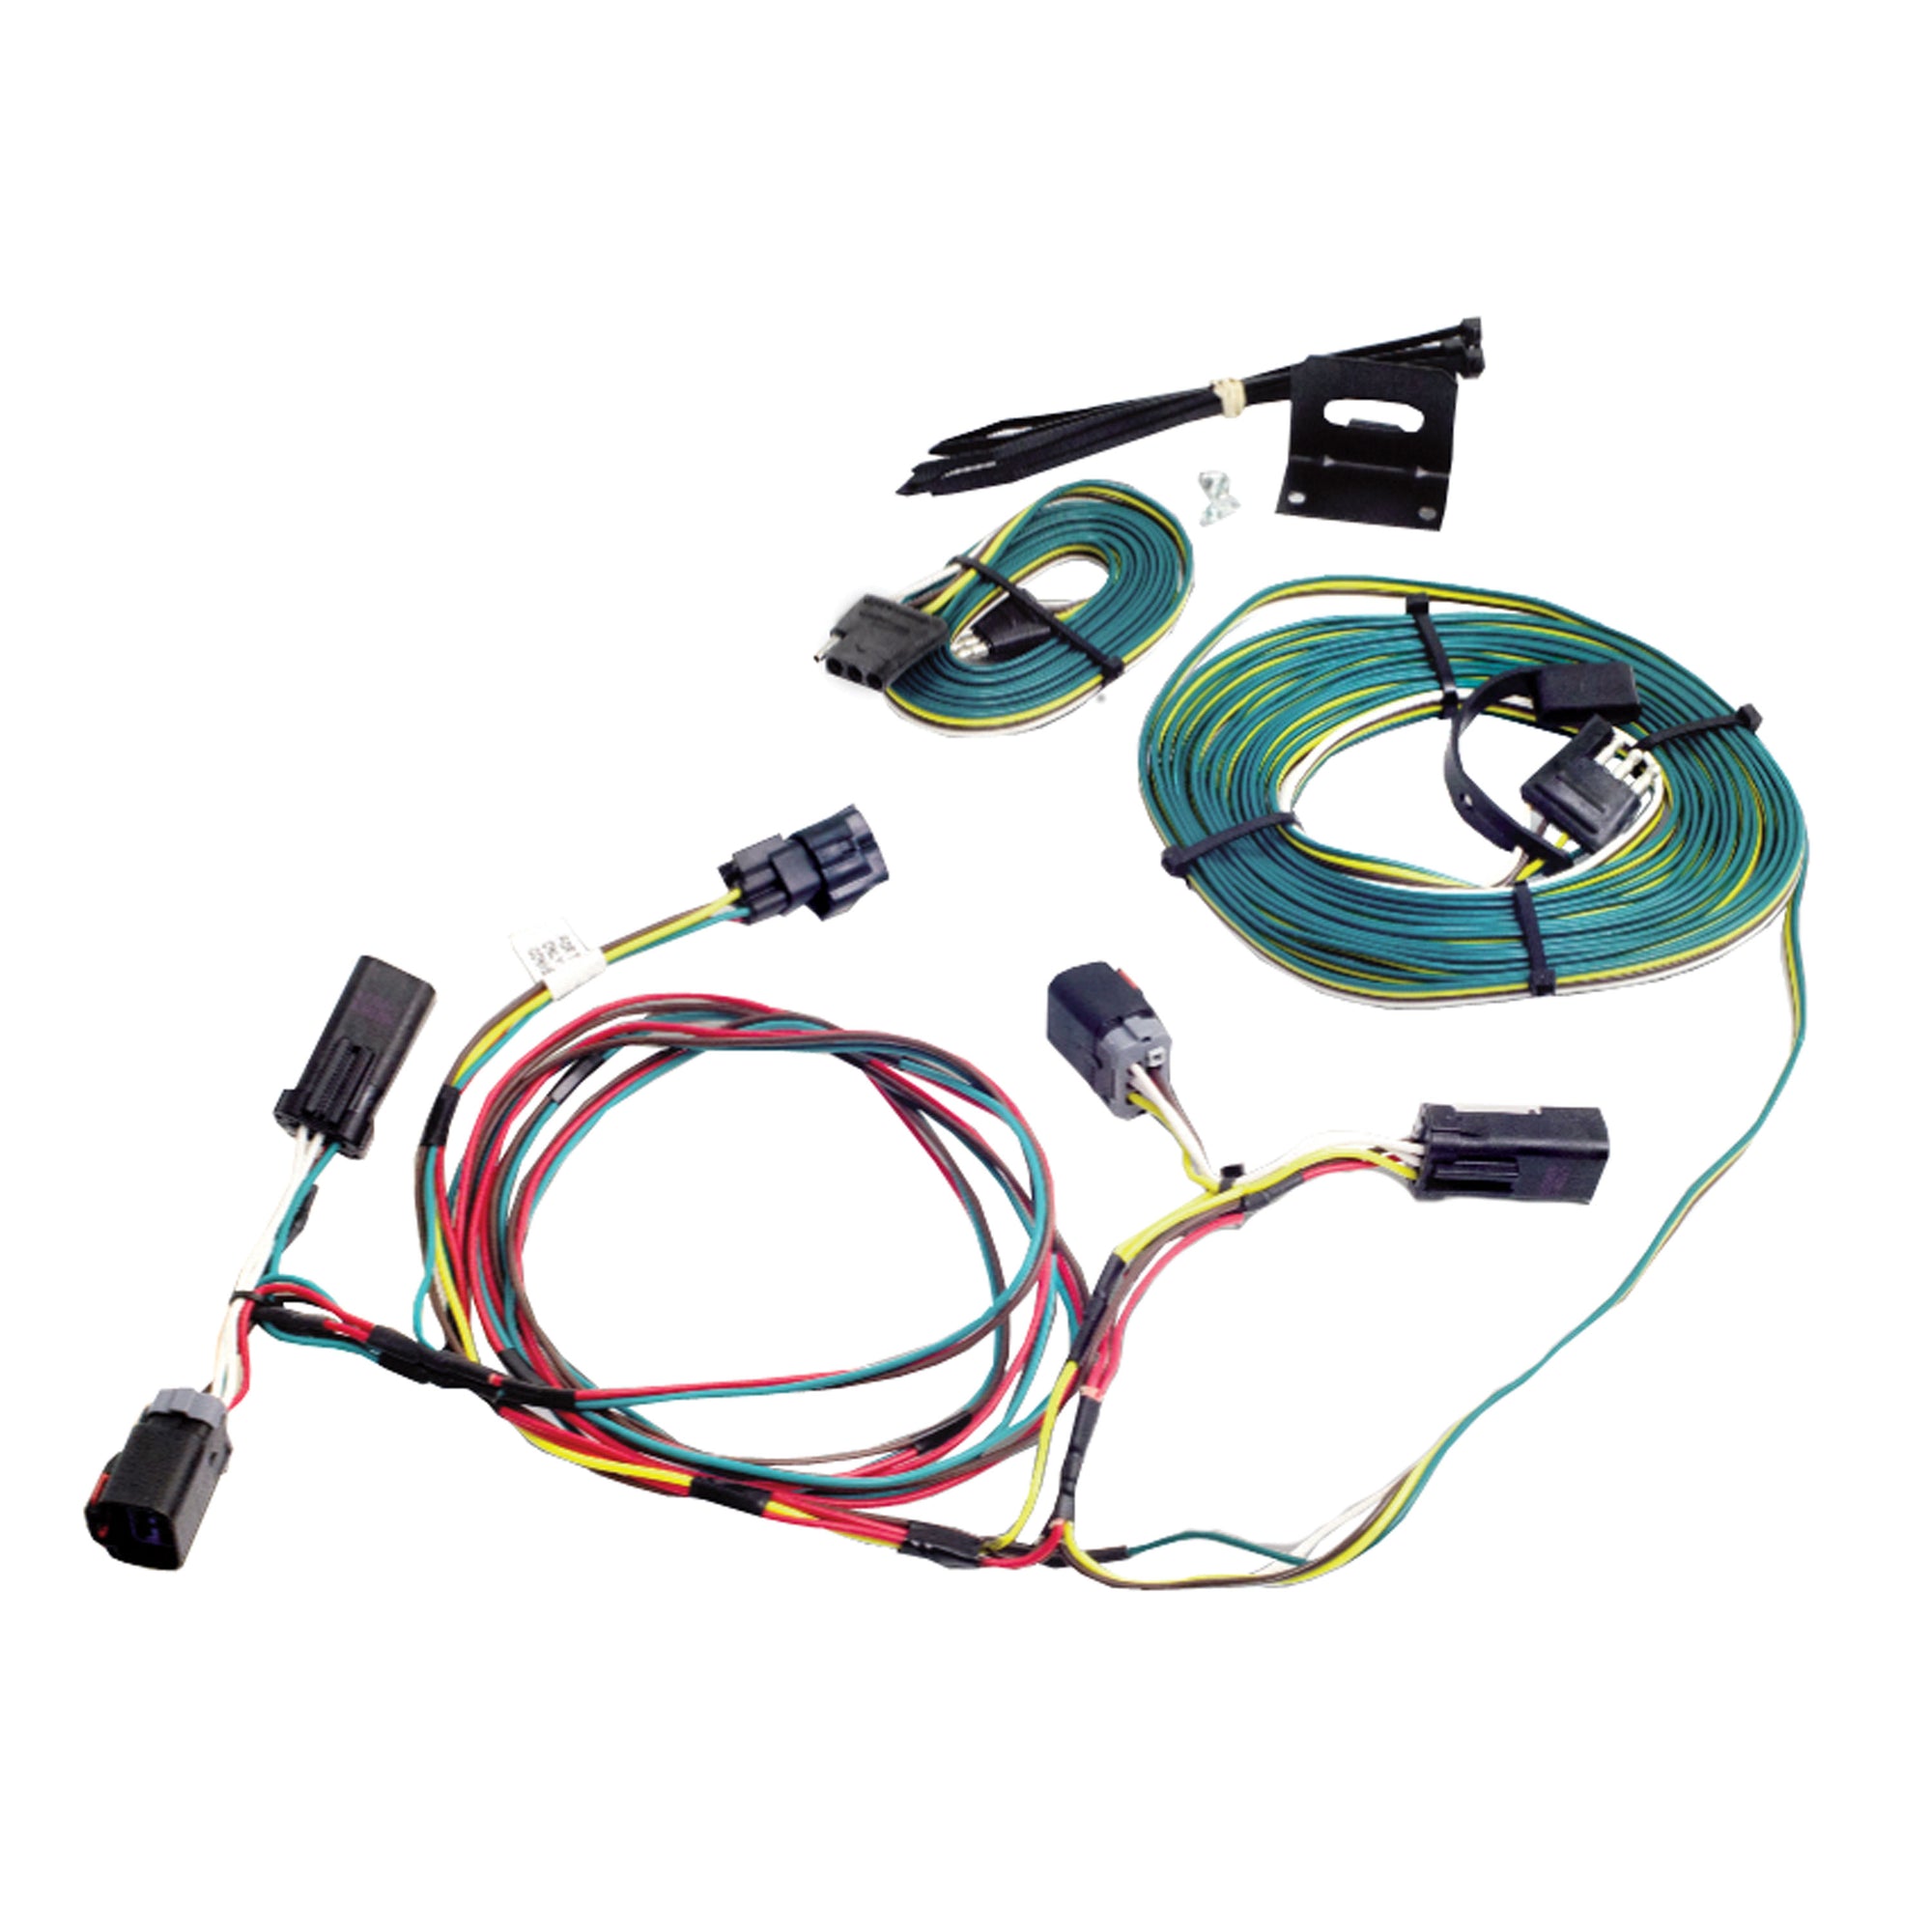 Demco 9523098 Towed Connector Vehicle Wiring Kit - For Select GMC/Cadillac/Chevrolet Models